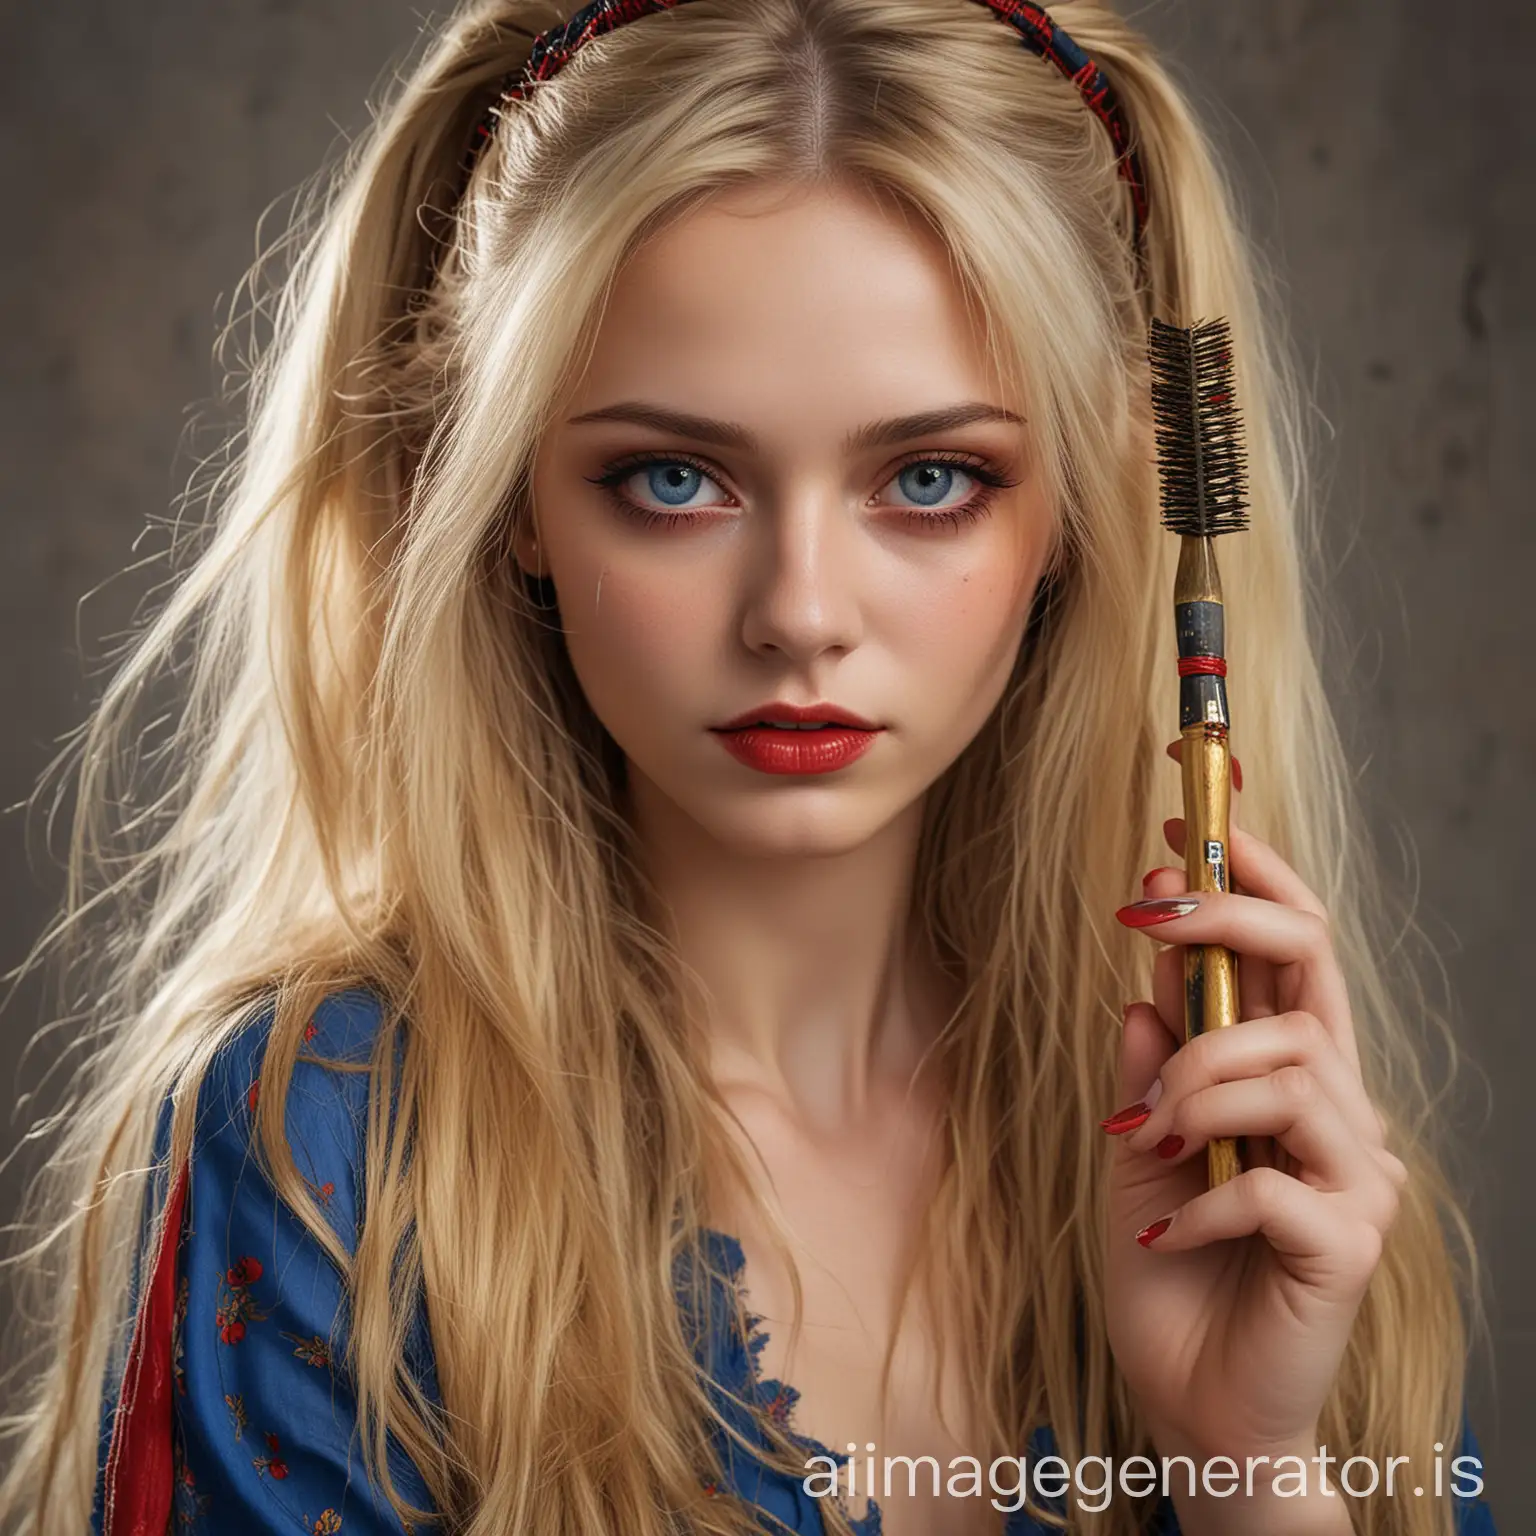 Woman long hair blonds Thin blue and red eyes long nails pointed ears holding a golden brush ragged dress